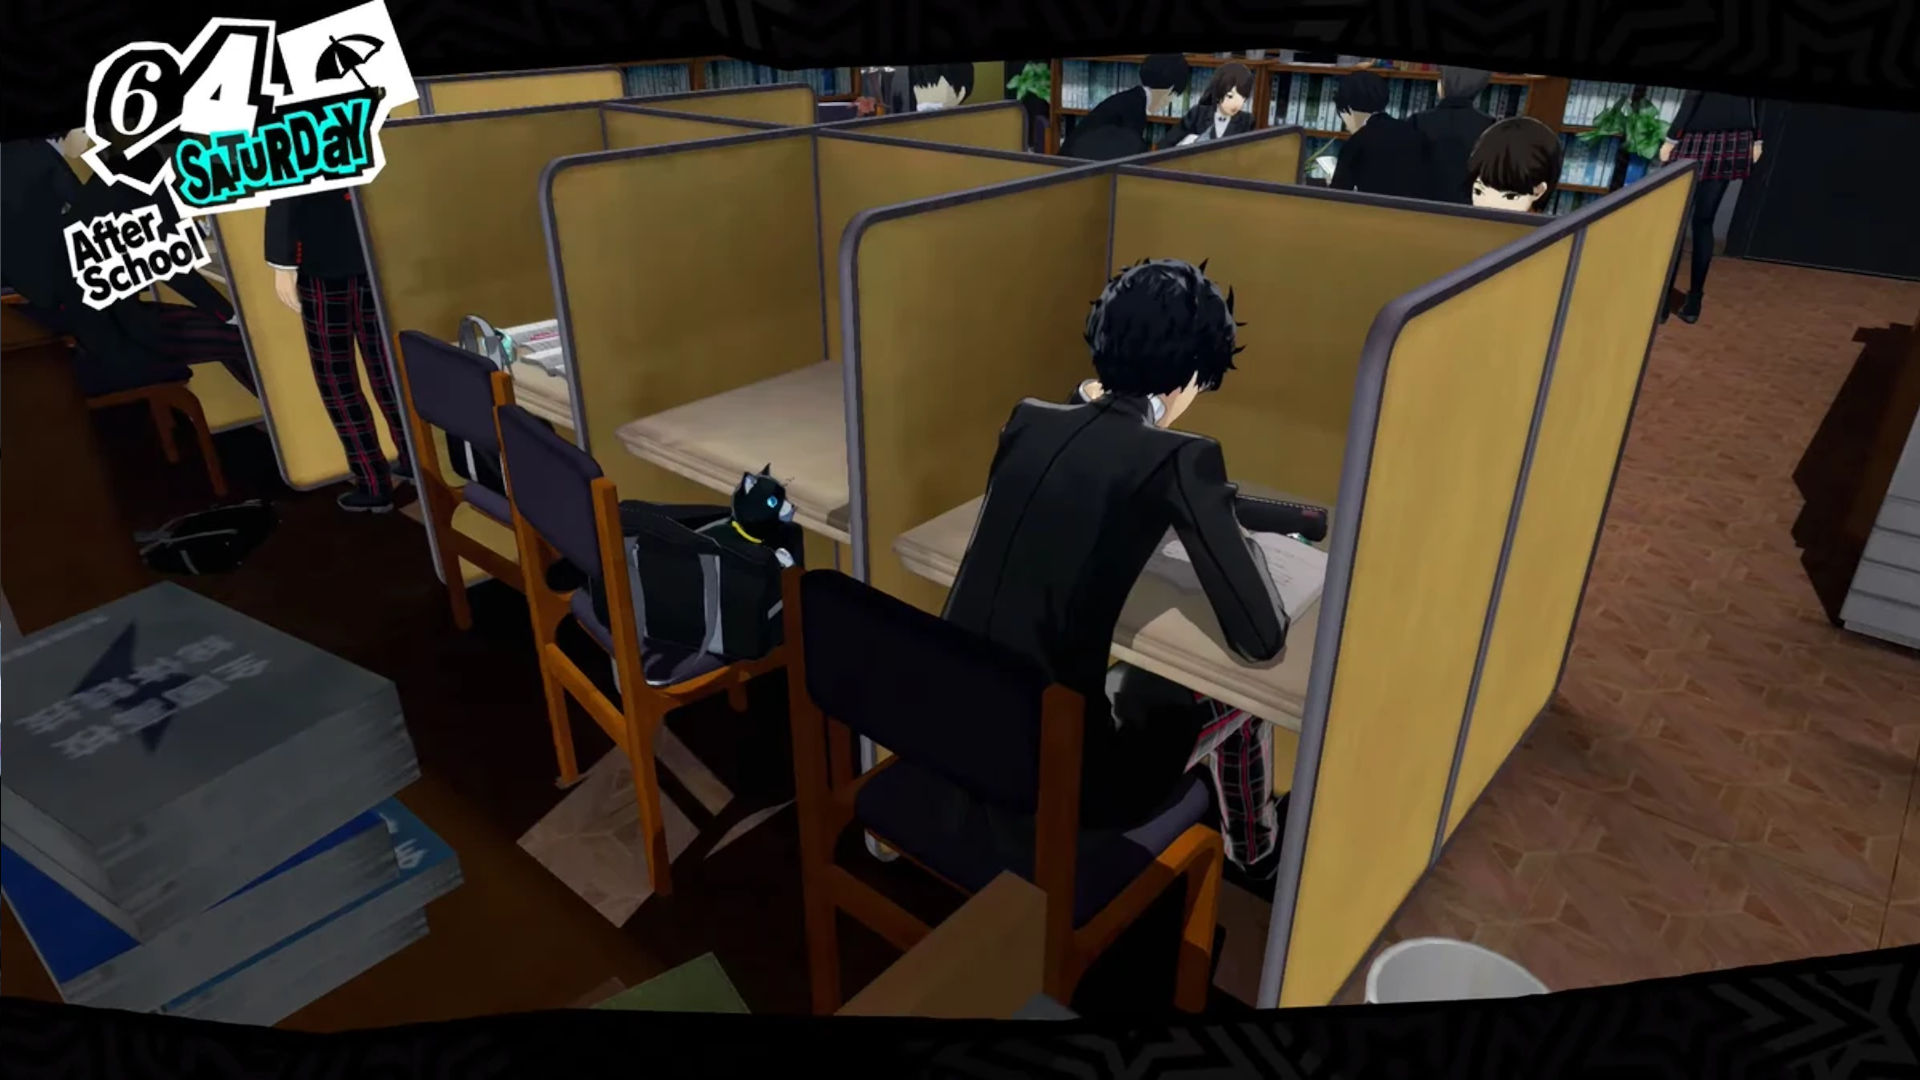 Steam Community :: Guide :: Persona 5 Royal Classroom and Exam answers